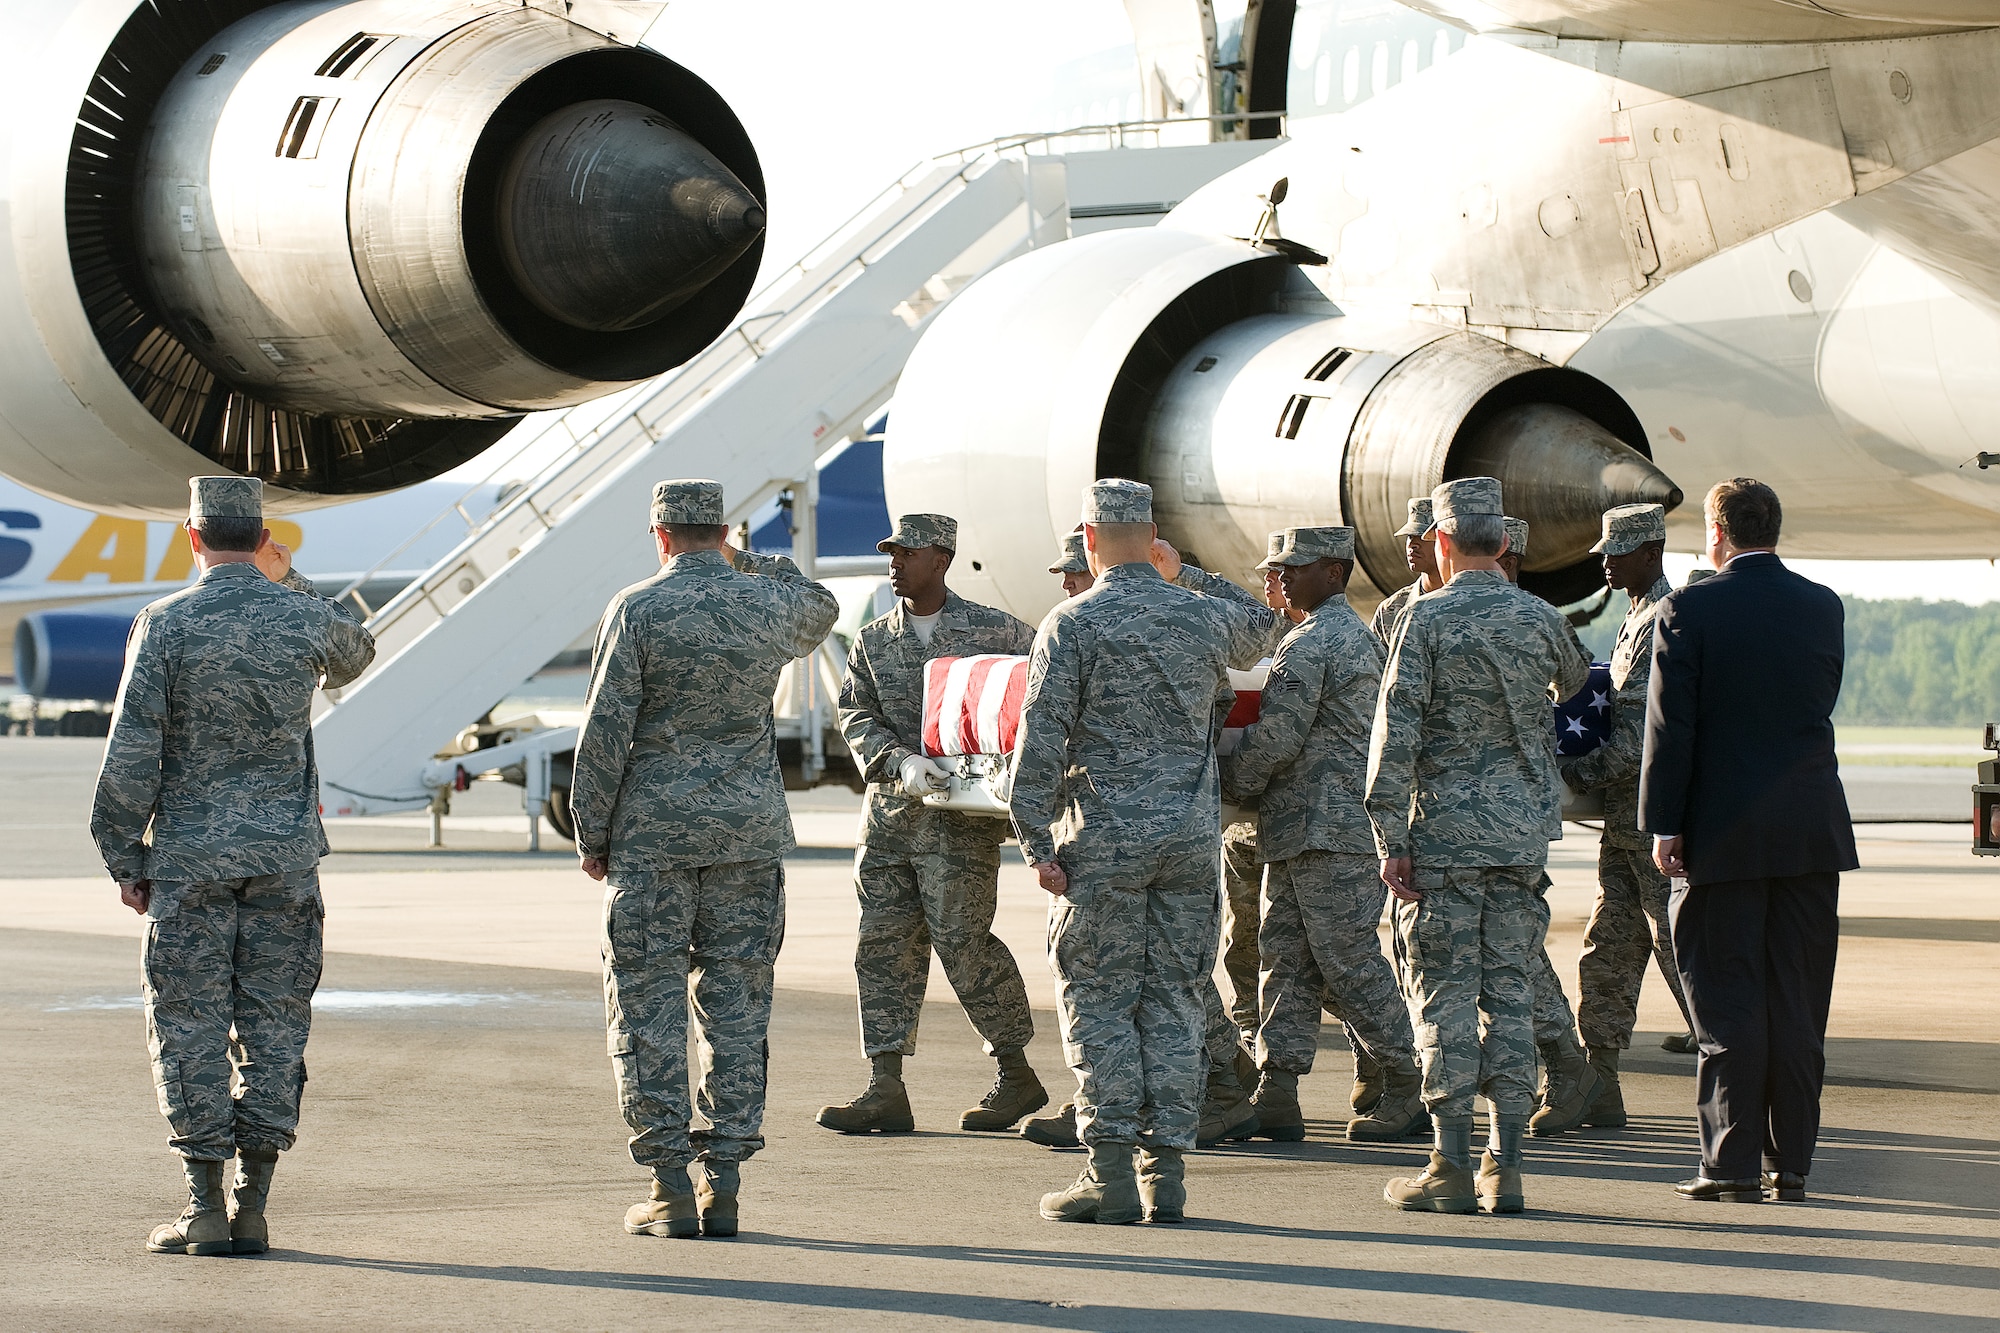 11 June 2010  USAF Photo by Jason Minto.  A U.S. Air Force carry team transfers the remains of Air Force SSgt Michael P. Flores of San Antonio, TX, at Dover Air Force Base, Del., June 11, 2010.  